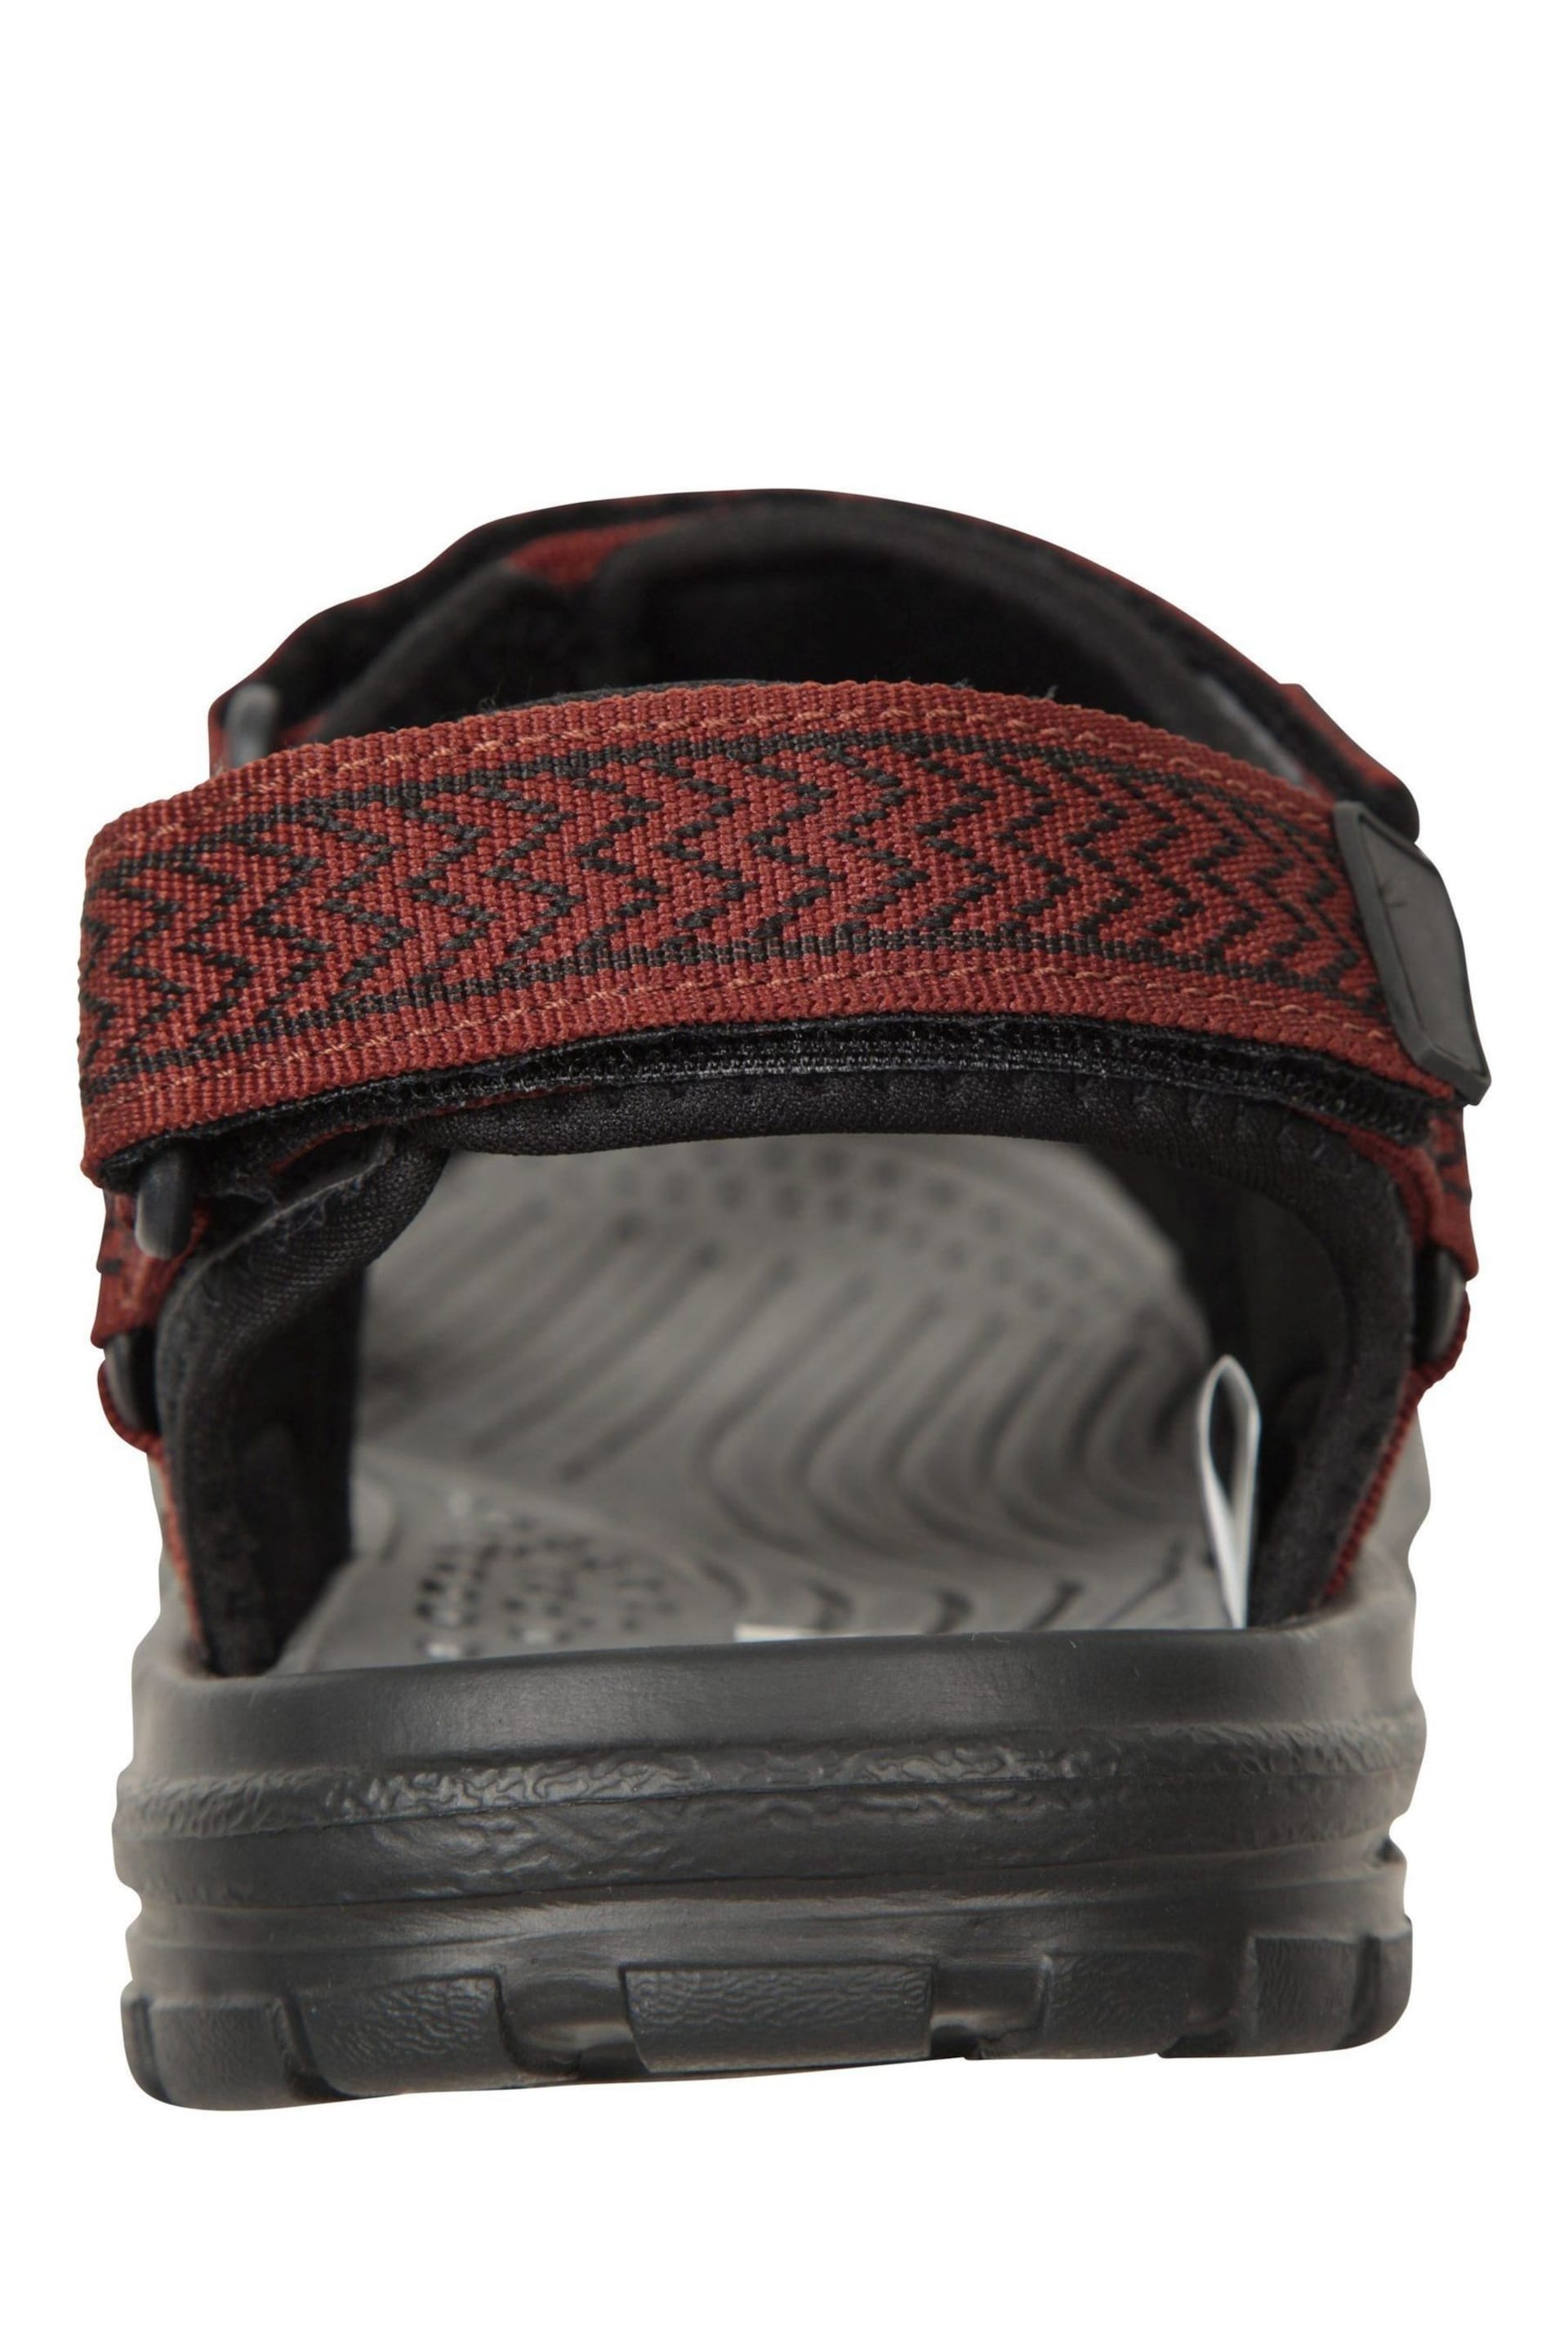 Mountain Warehouse Brown Crete Mens Sandals - Image 4 of 6